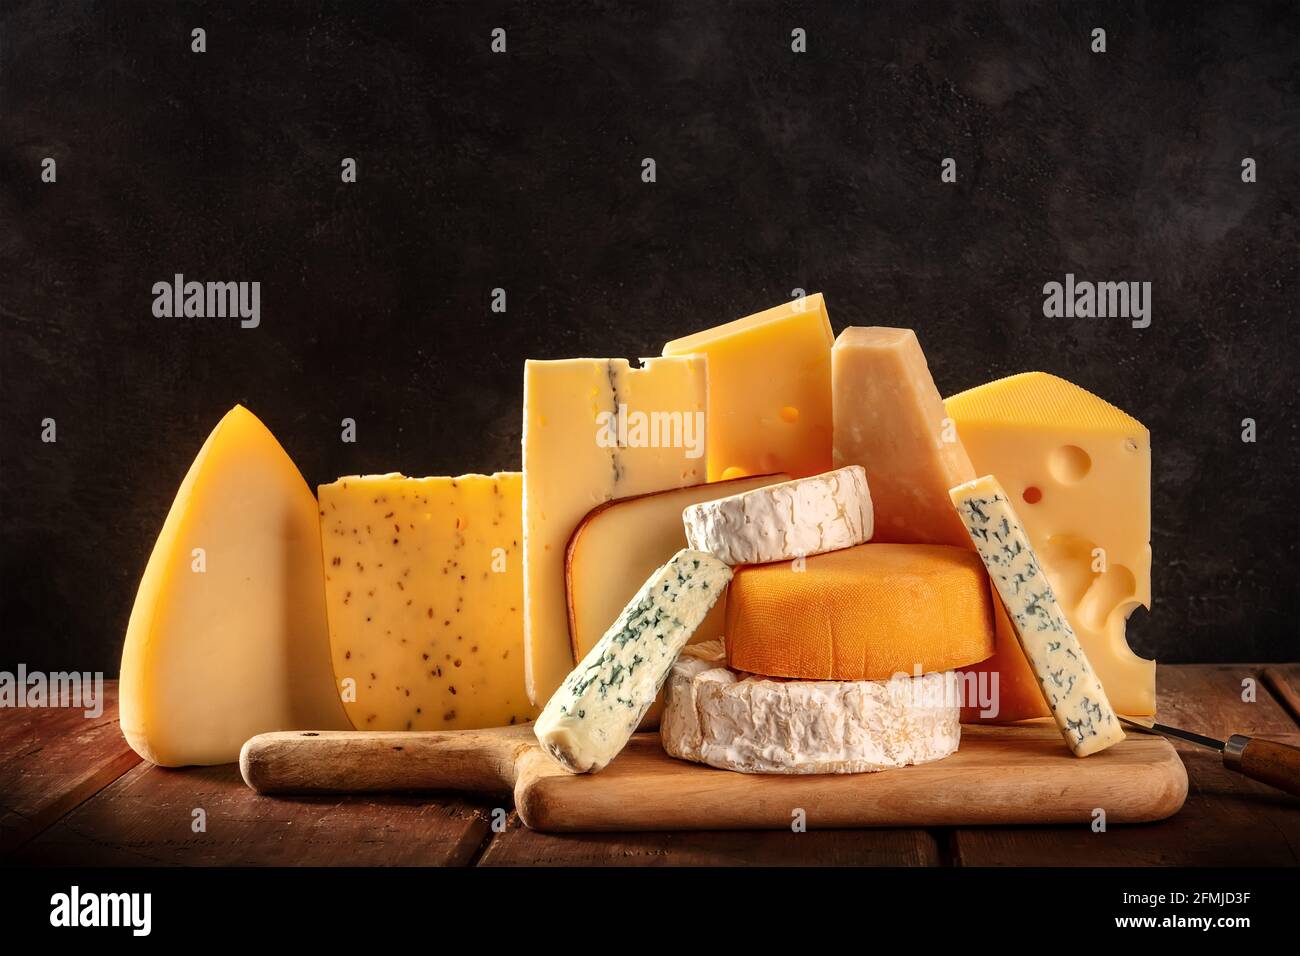 Cheese variety on dark rustic backgrounds. Soft and hard cheeses, side view with a place for text Stock Photo